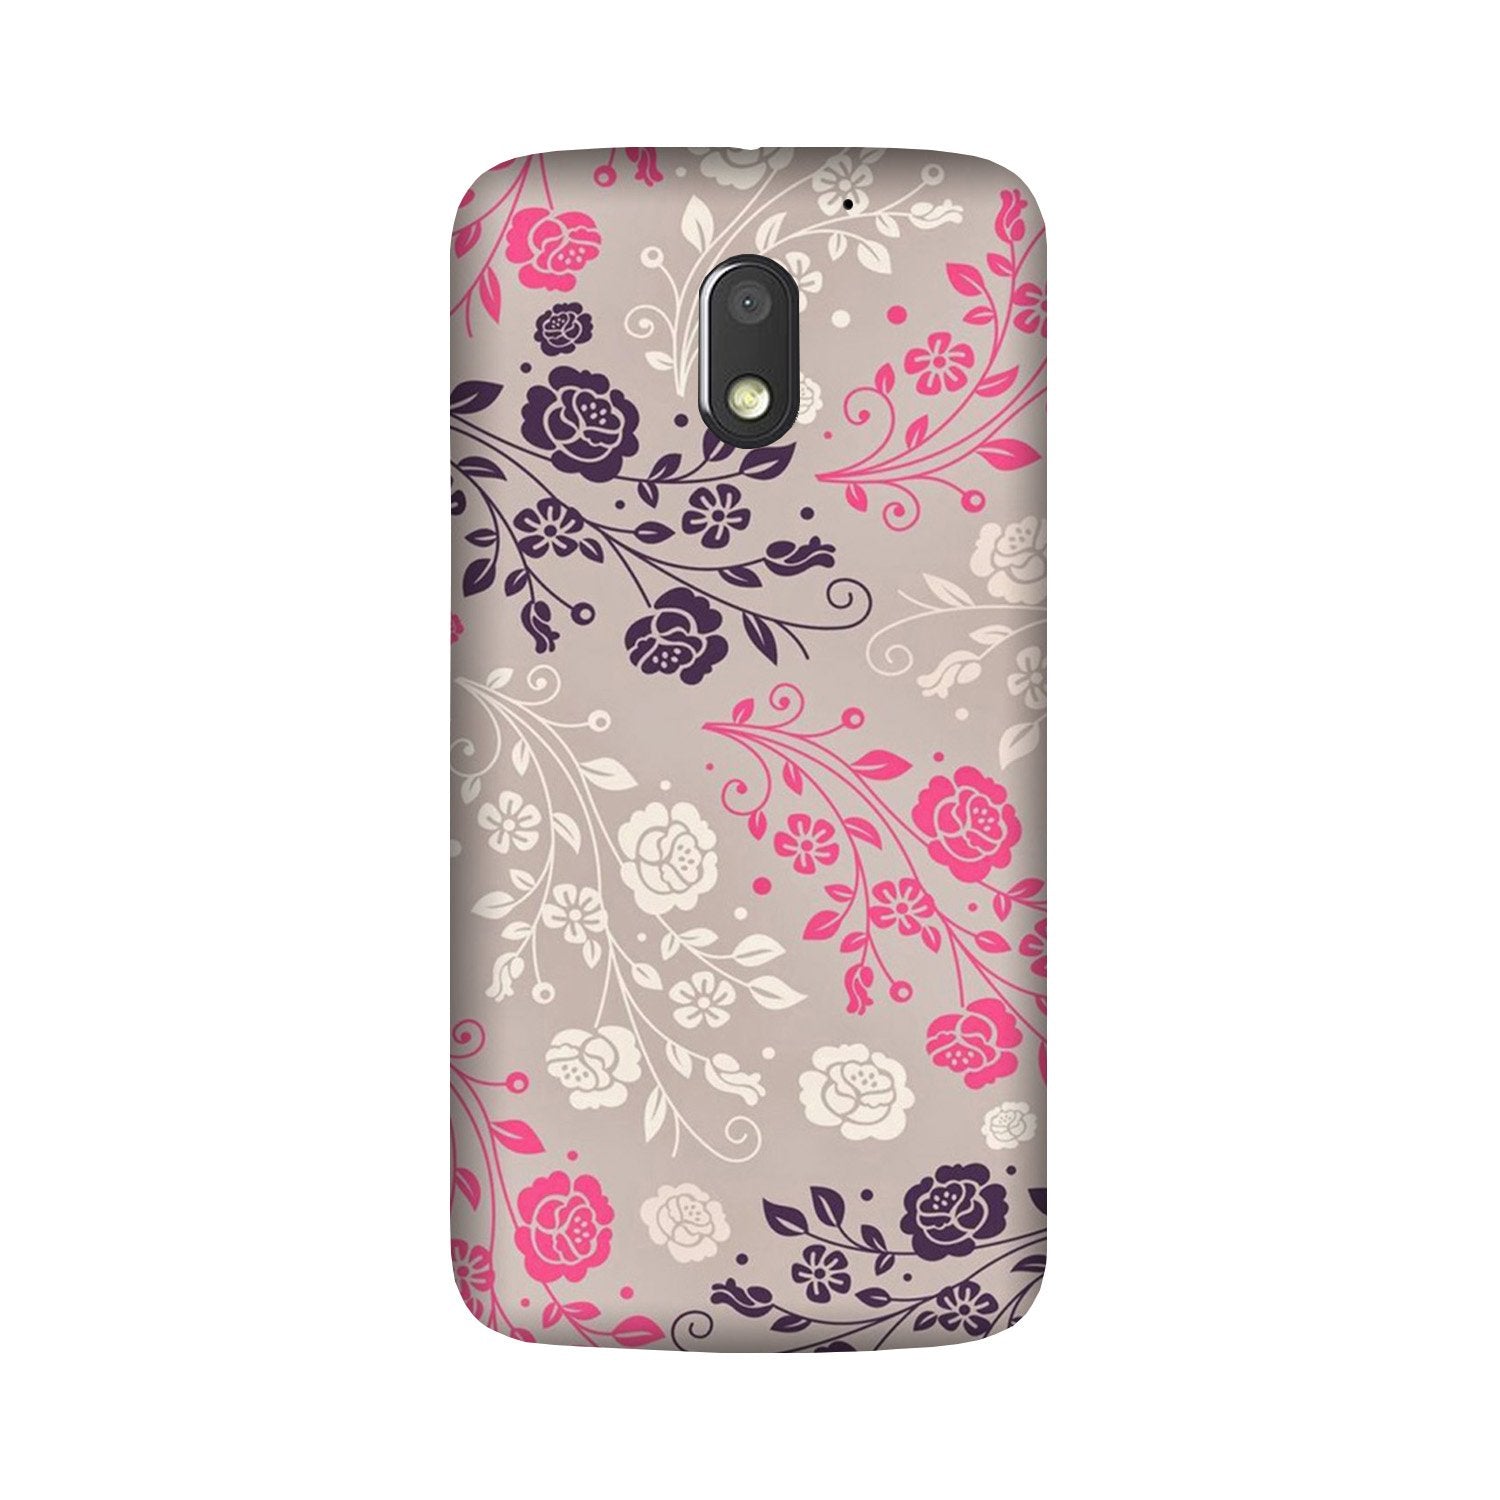 Pattern2 Case for Moto G4 Play